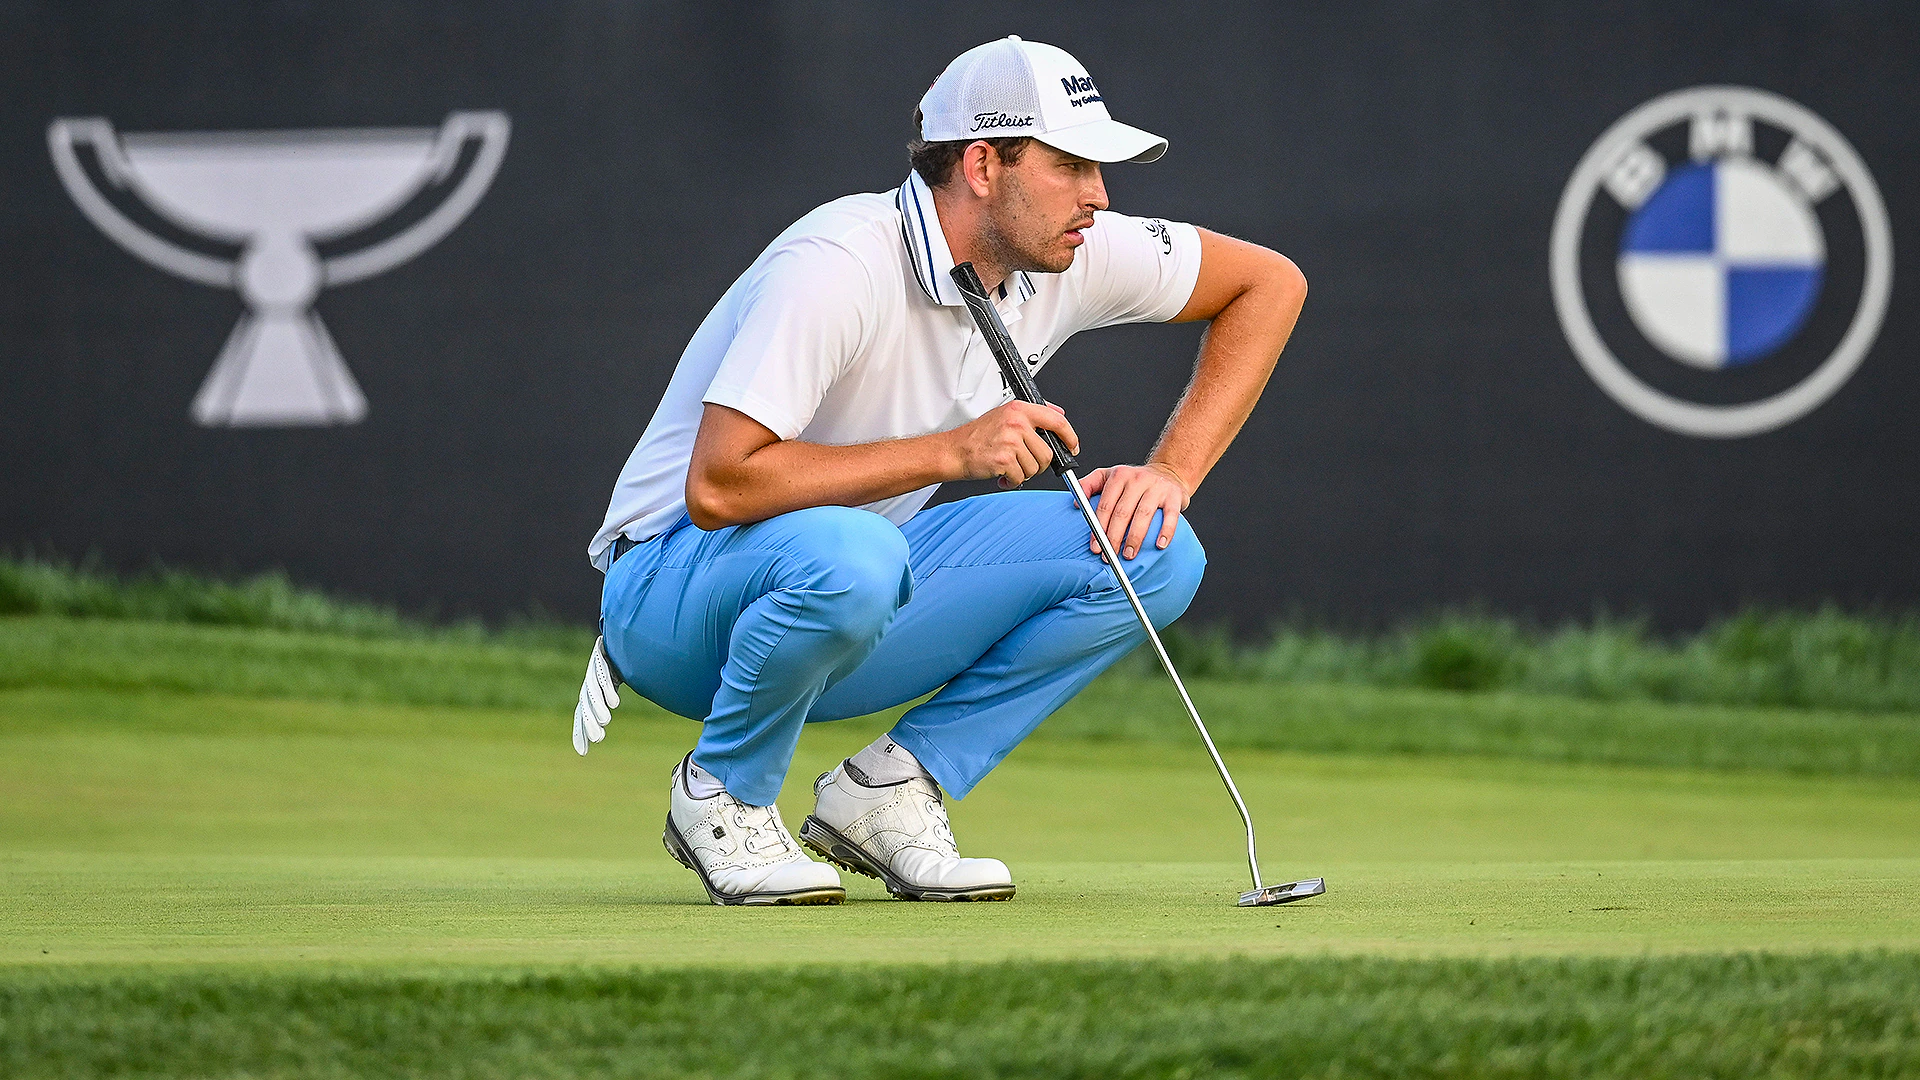 Full list of the 70 players who qualified for the BMW Championship